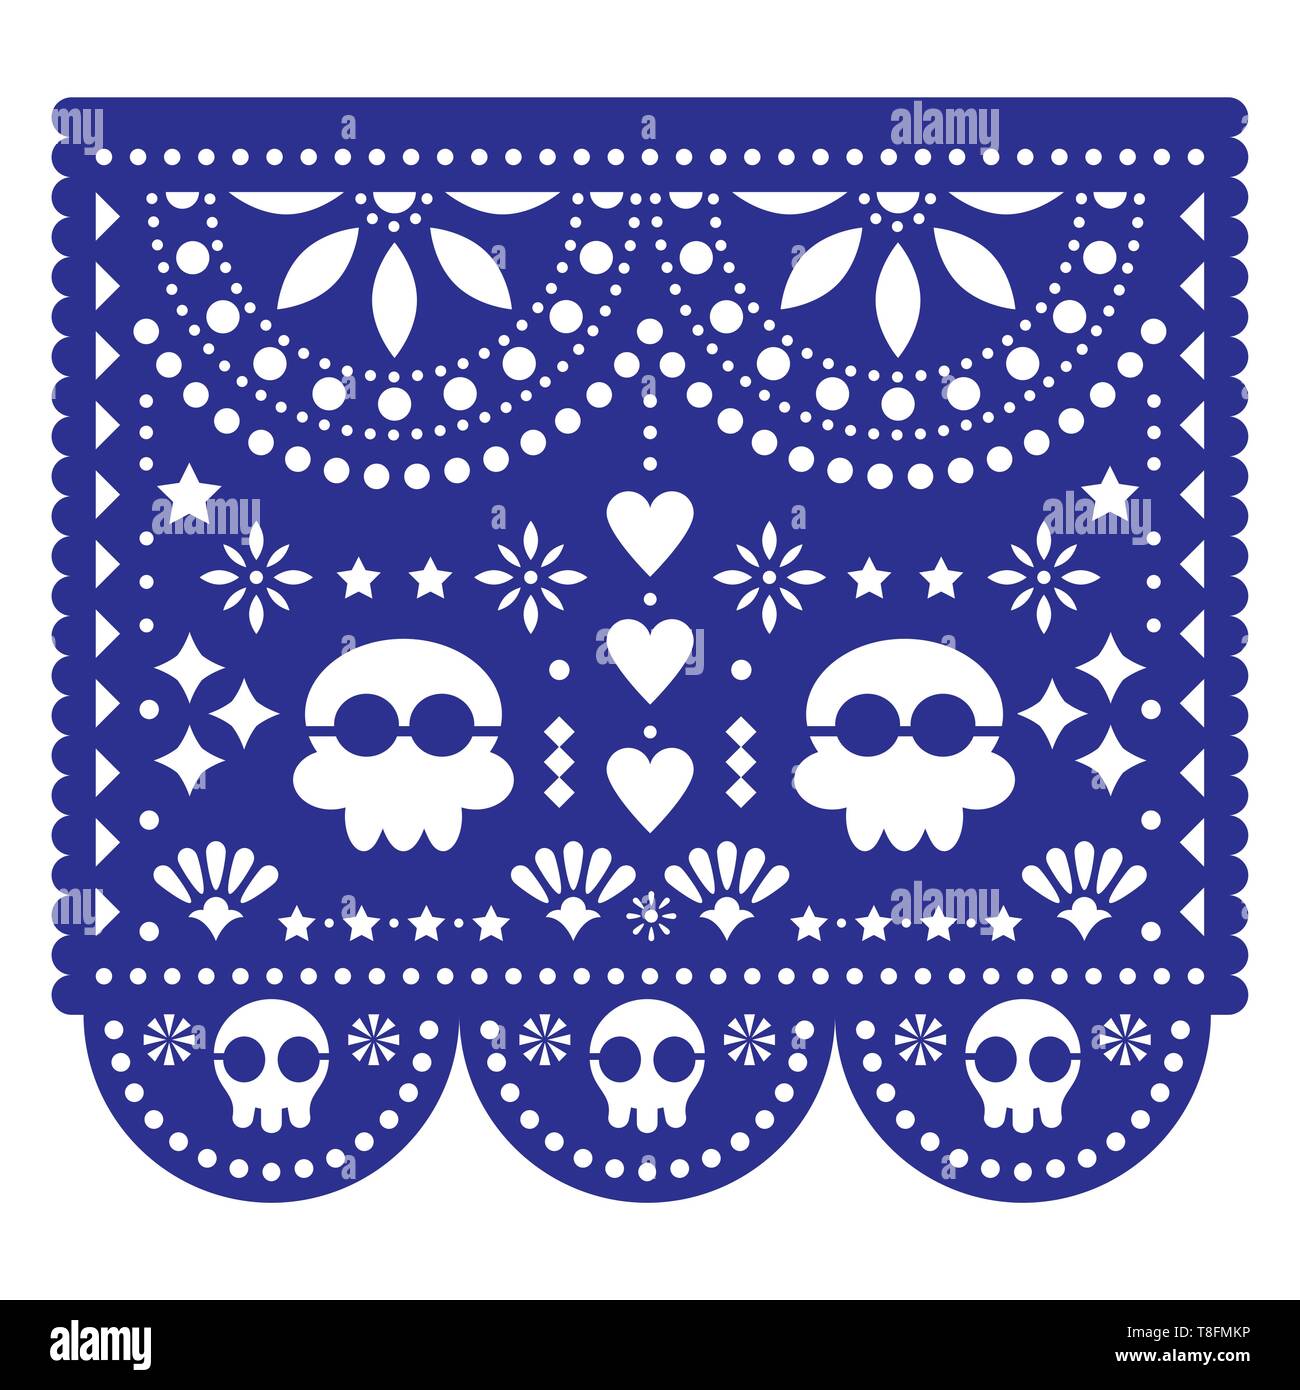 Halloween, Day of the Dead design with skulls - Mexican Papel Picado decoration with flowers and geometric shapes Stock Vector